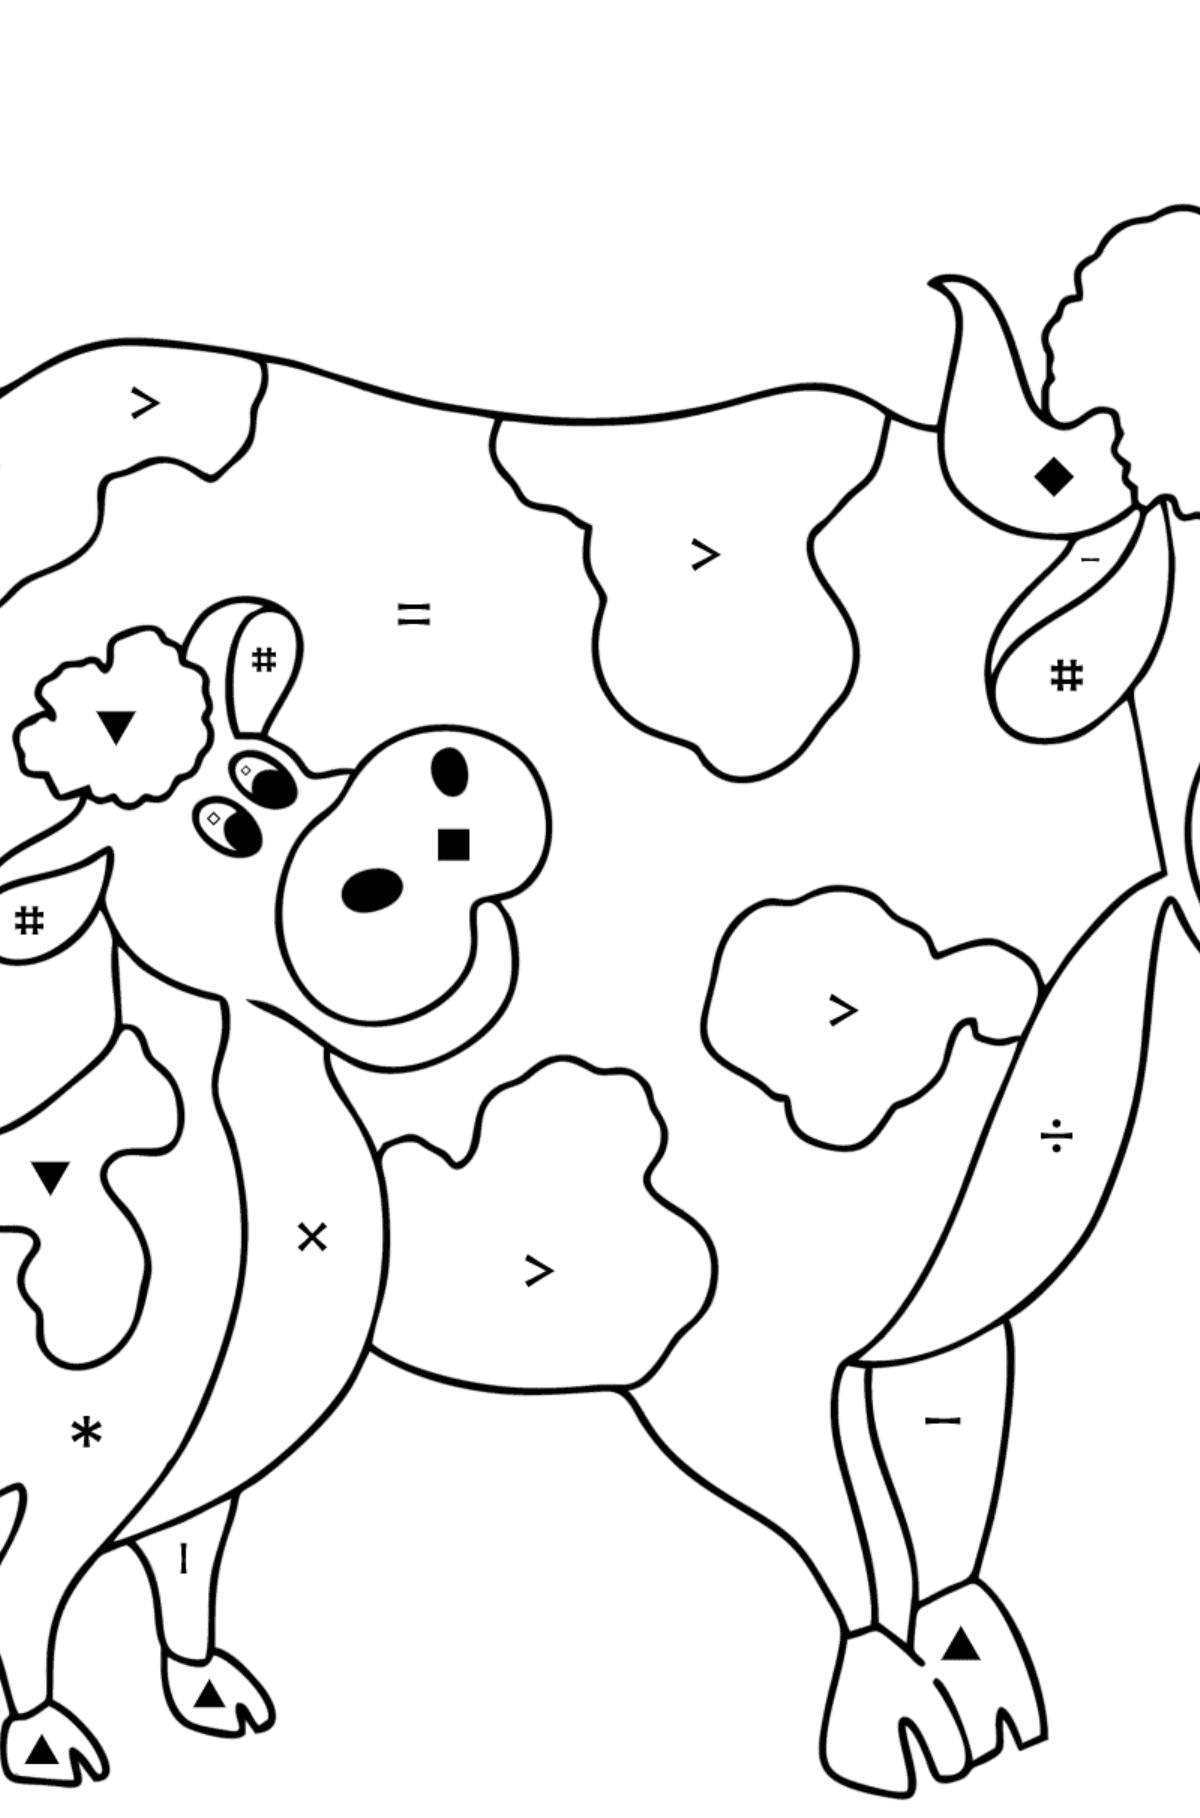 Cow and calf coloring pages - Coloring by Symbols for Kids